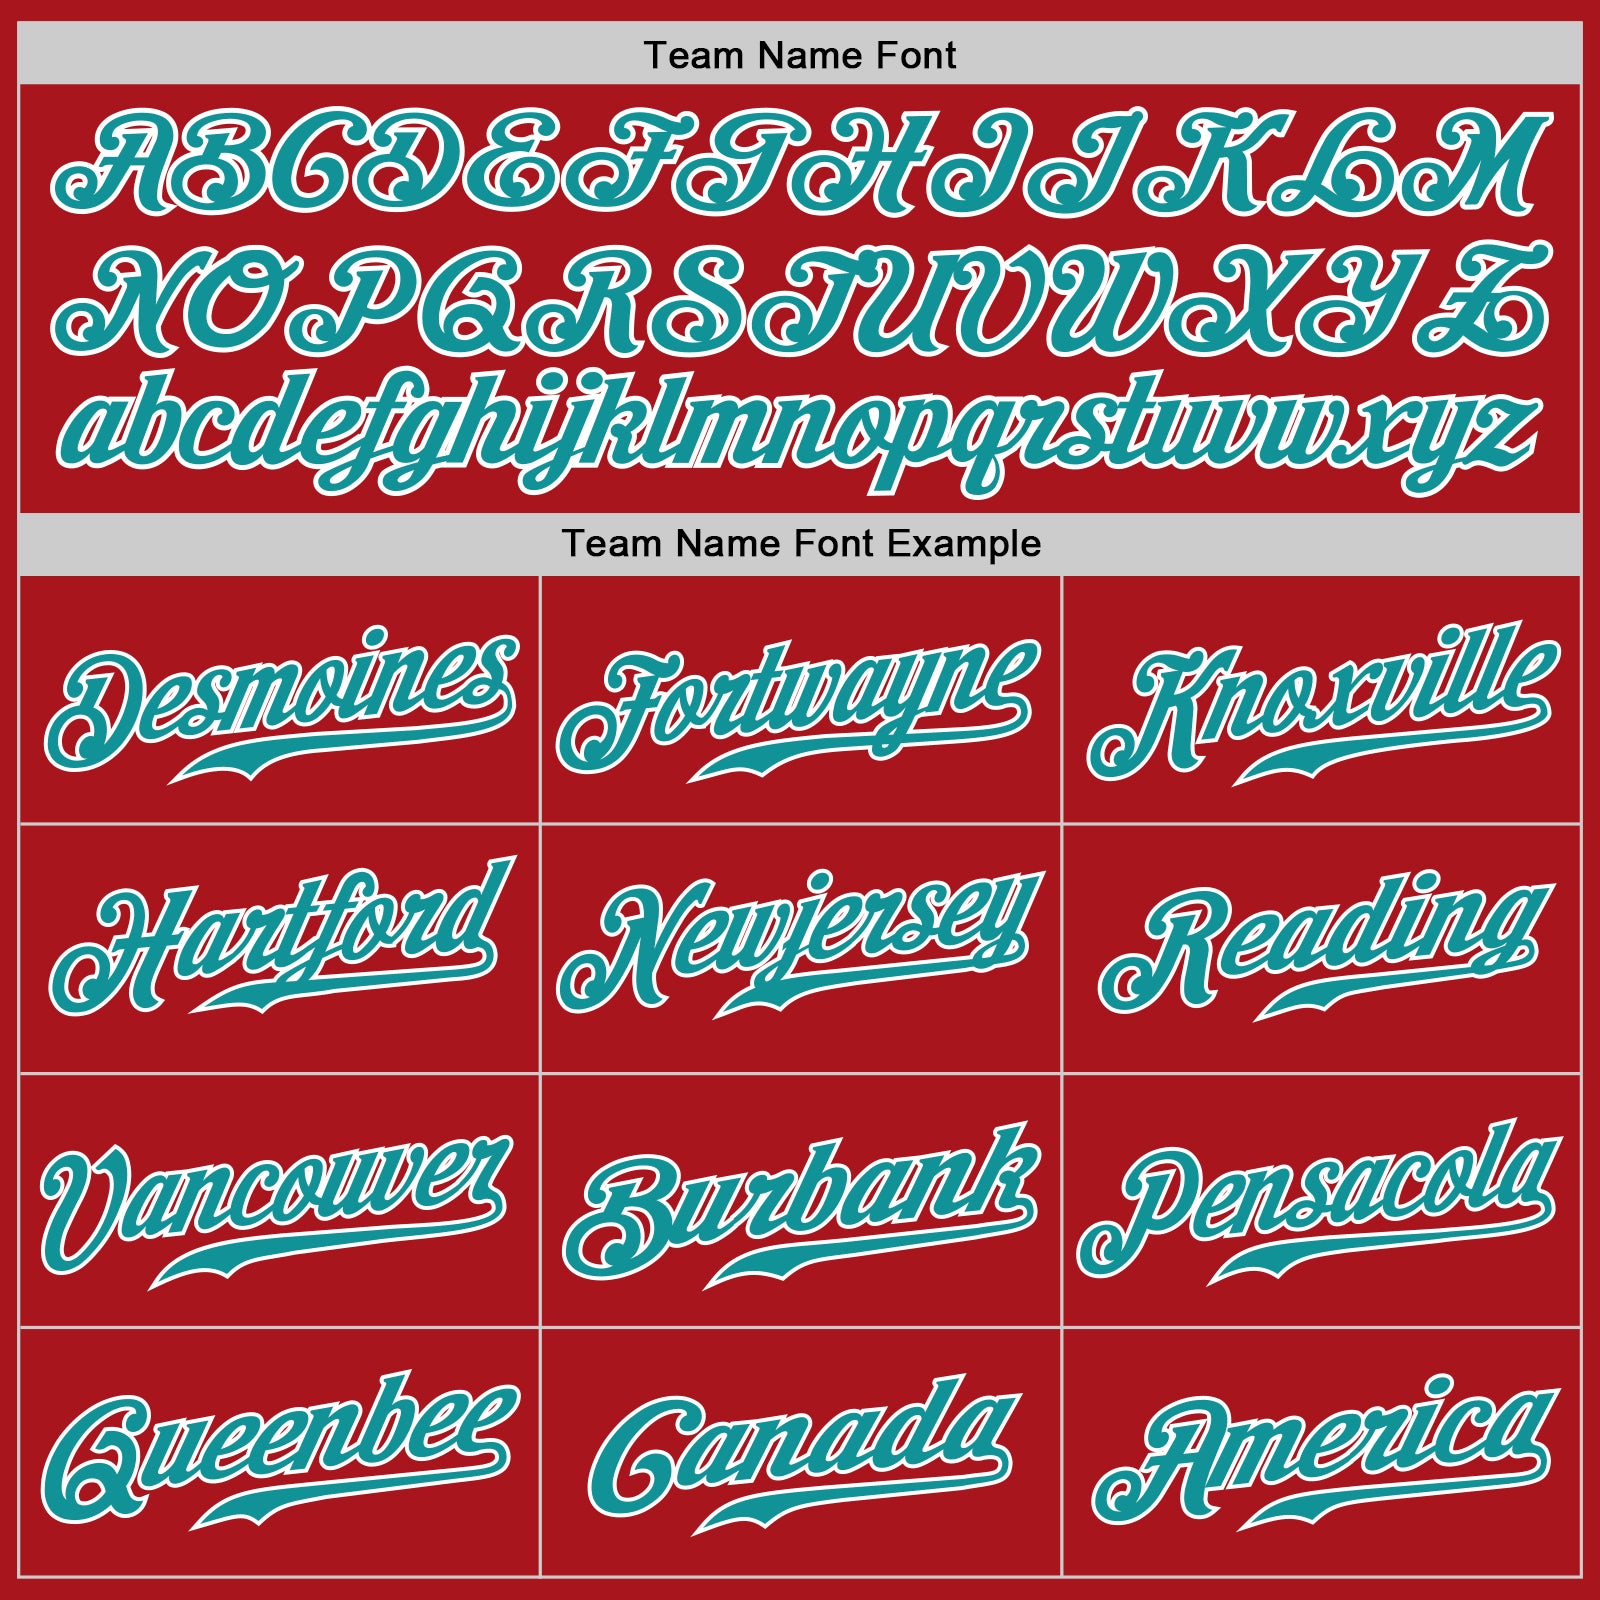 Custom Red Teal-White Authentic Baseball Jersey